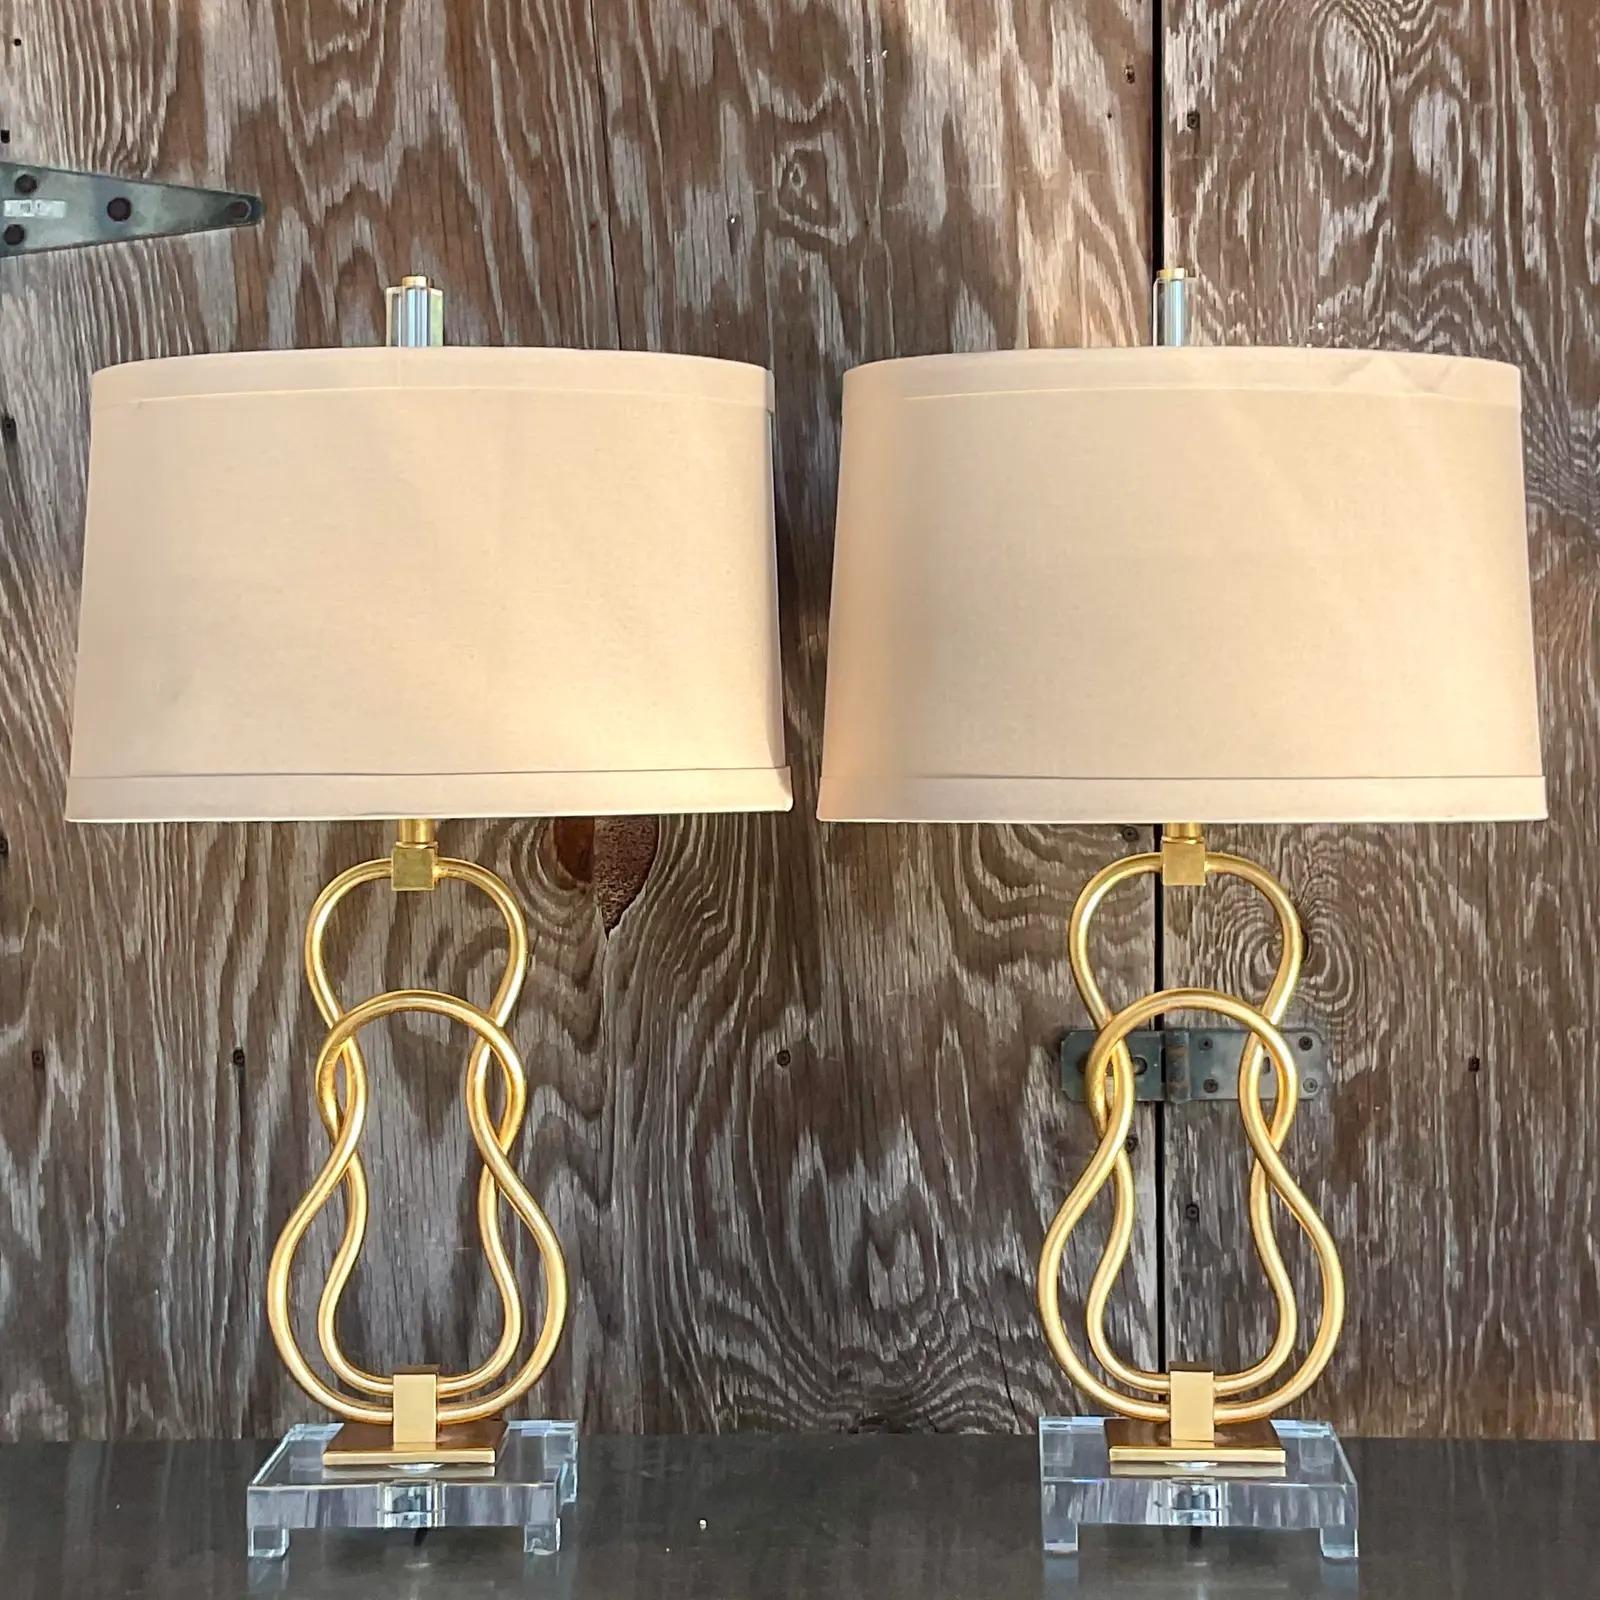 Vintage Contemporary Linked Gilt Rings Lamps - a Pair For Sale 3